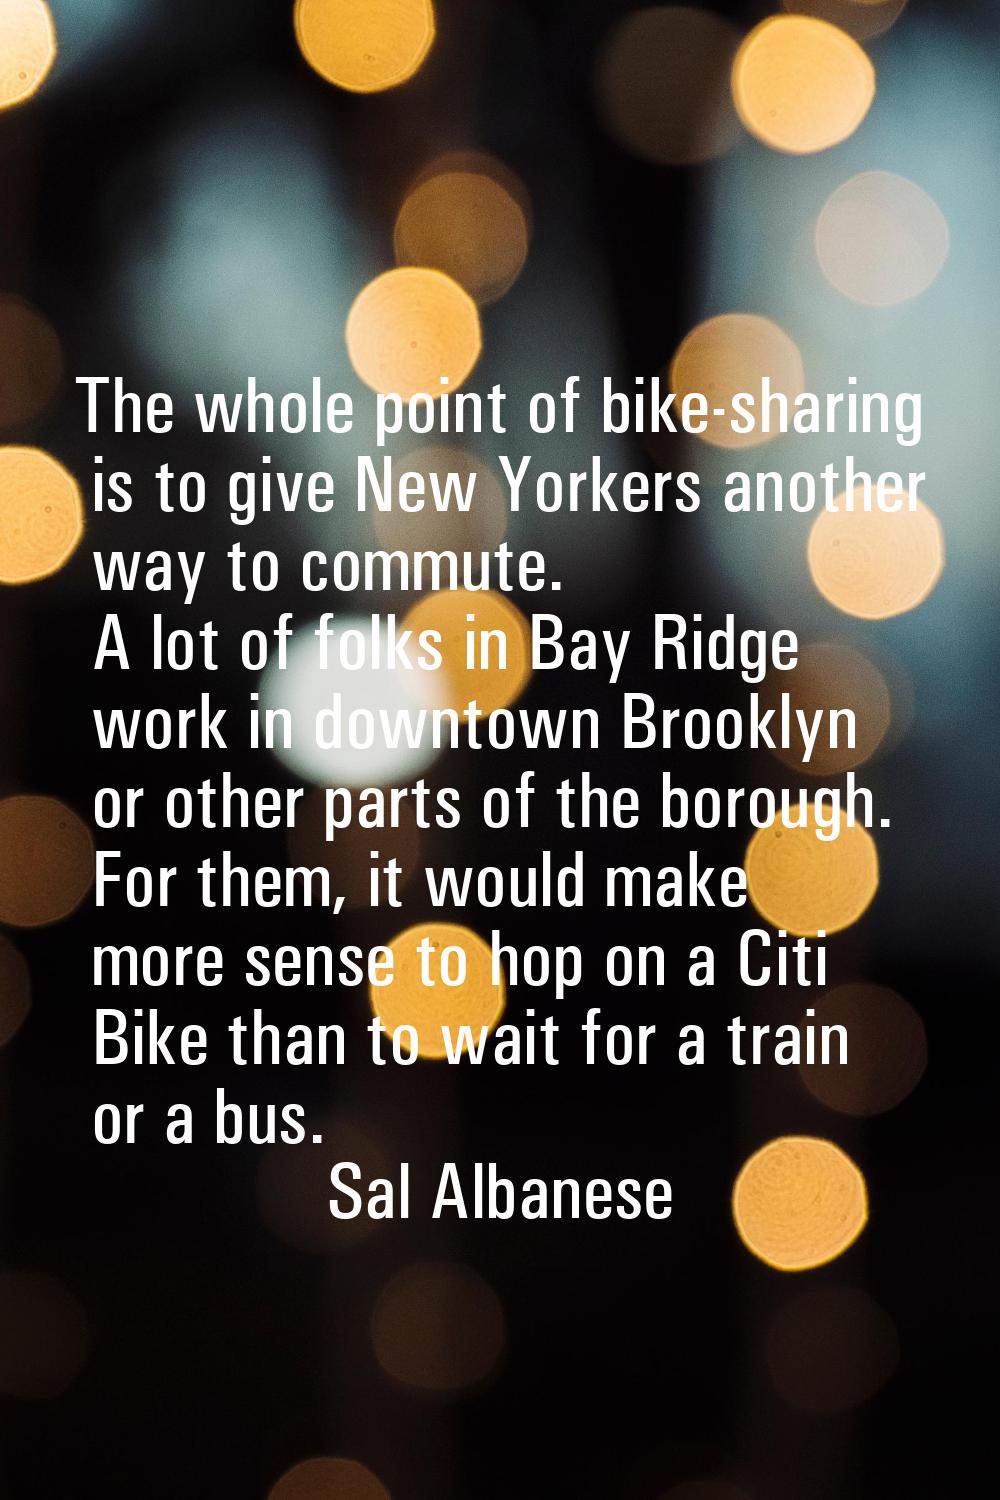 The whole point of bike-sharing is to give New Yorkers another way to commute. A lot of folks in Ba